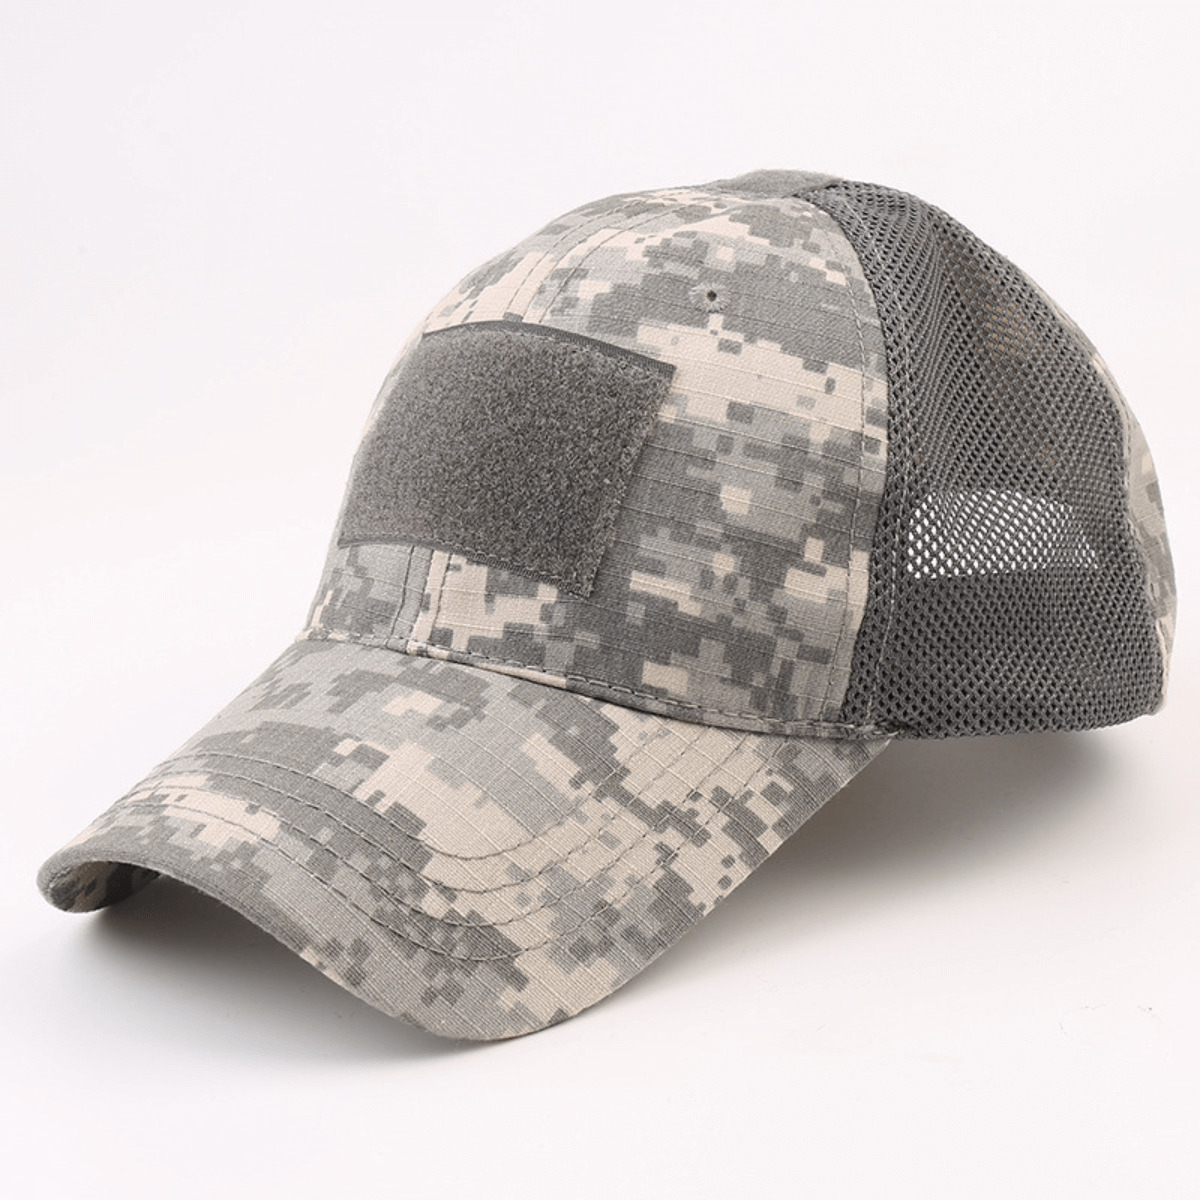 Tactical-Style Patch Hat With Adjustable Strap - BDU Digital